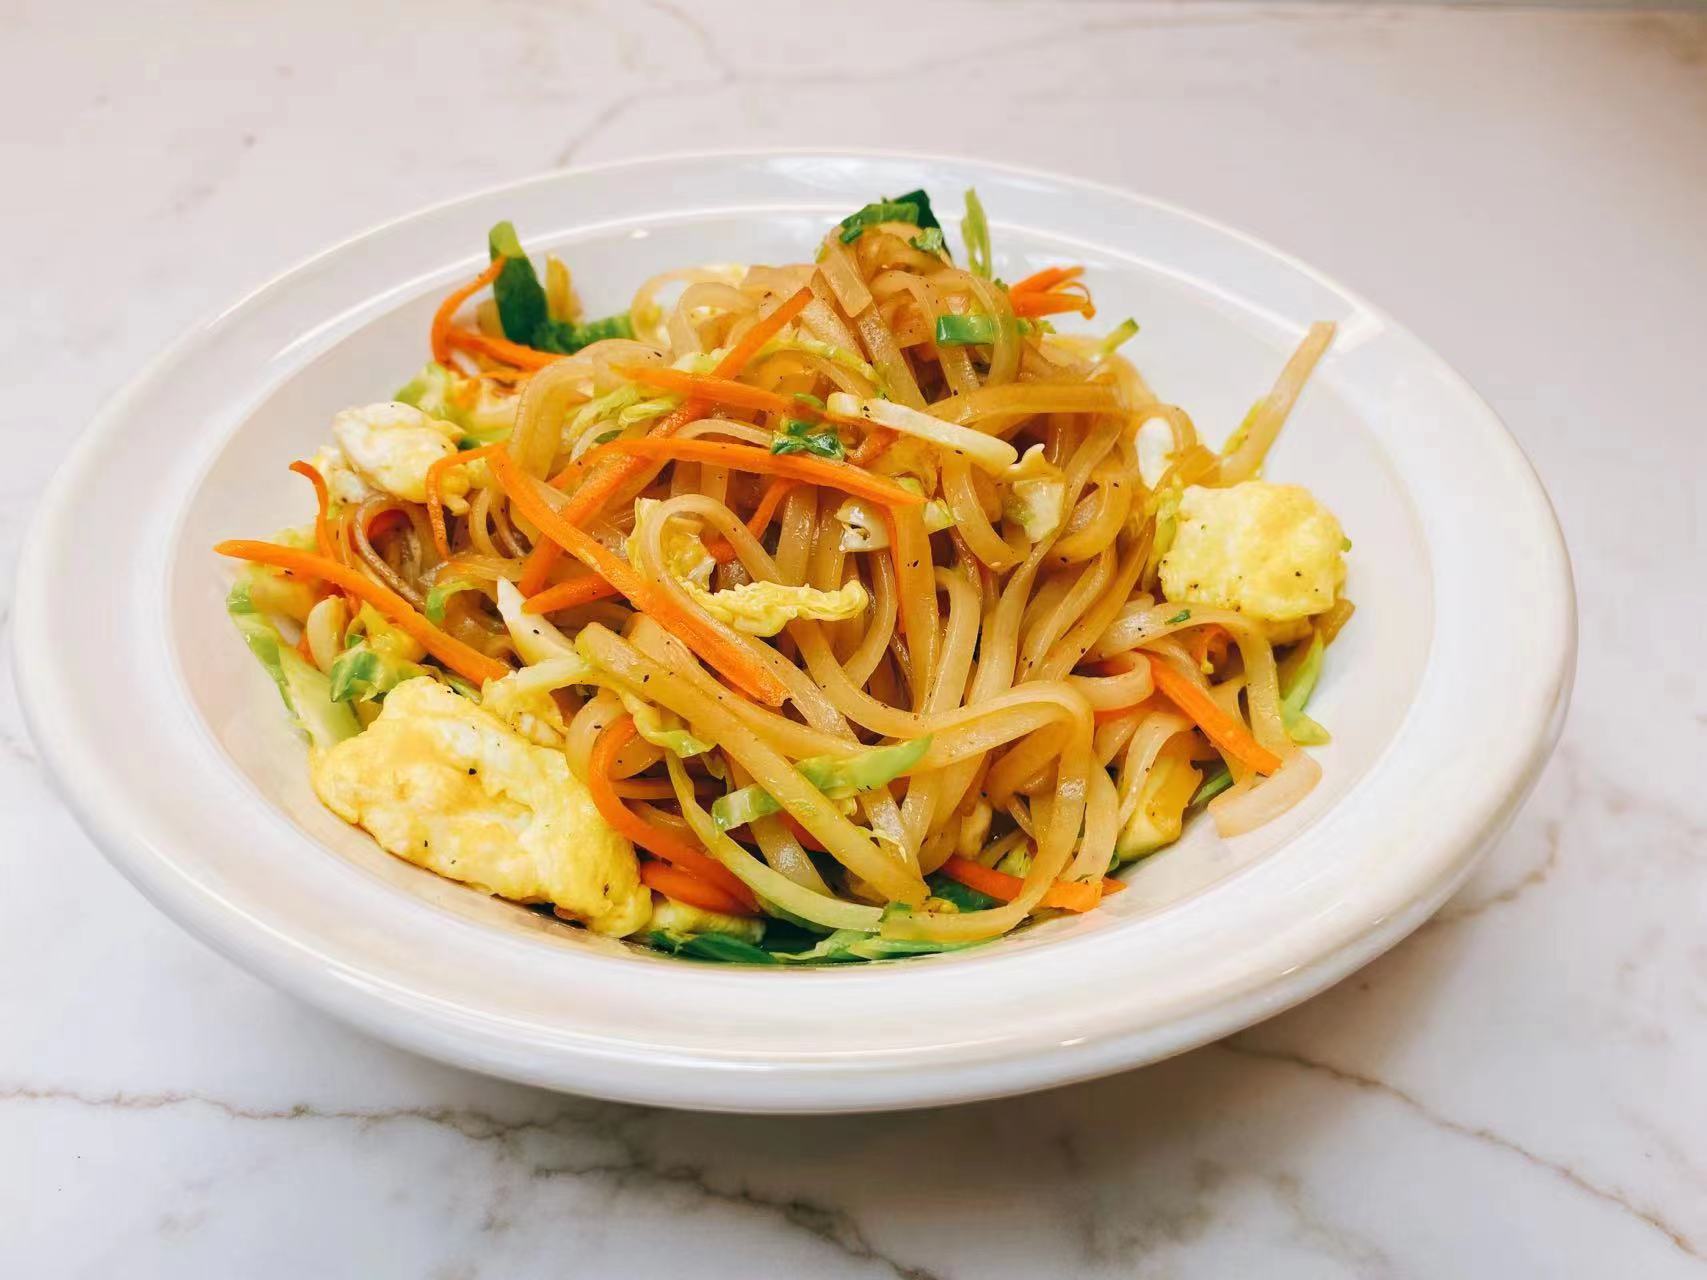 Egg and Vegetables with Fried Rice Noodles